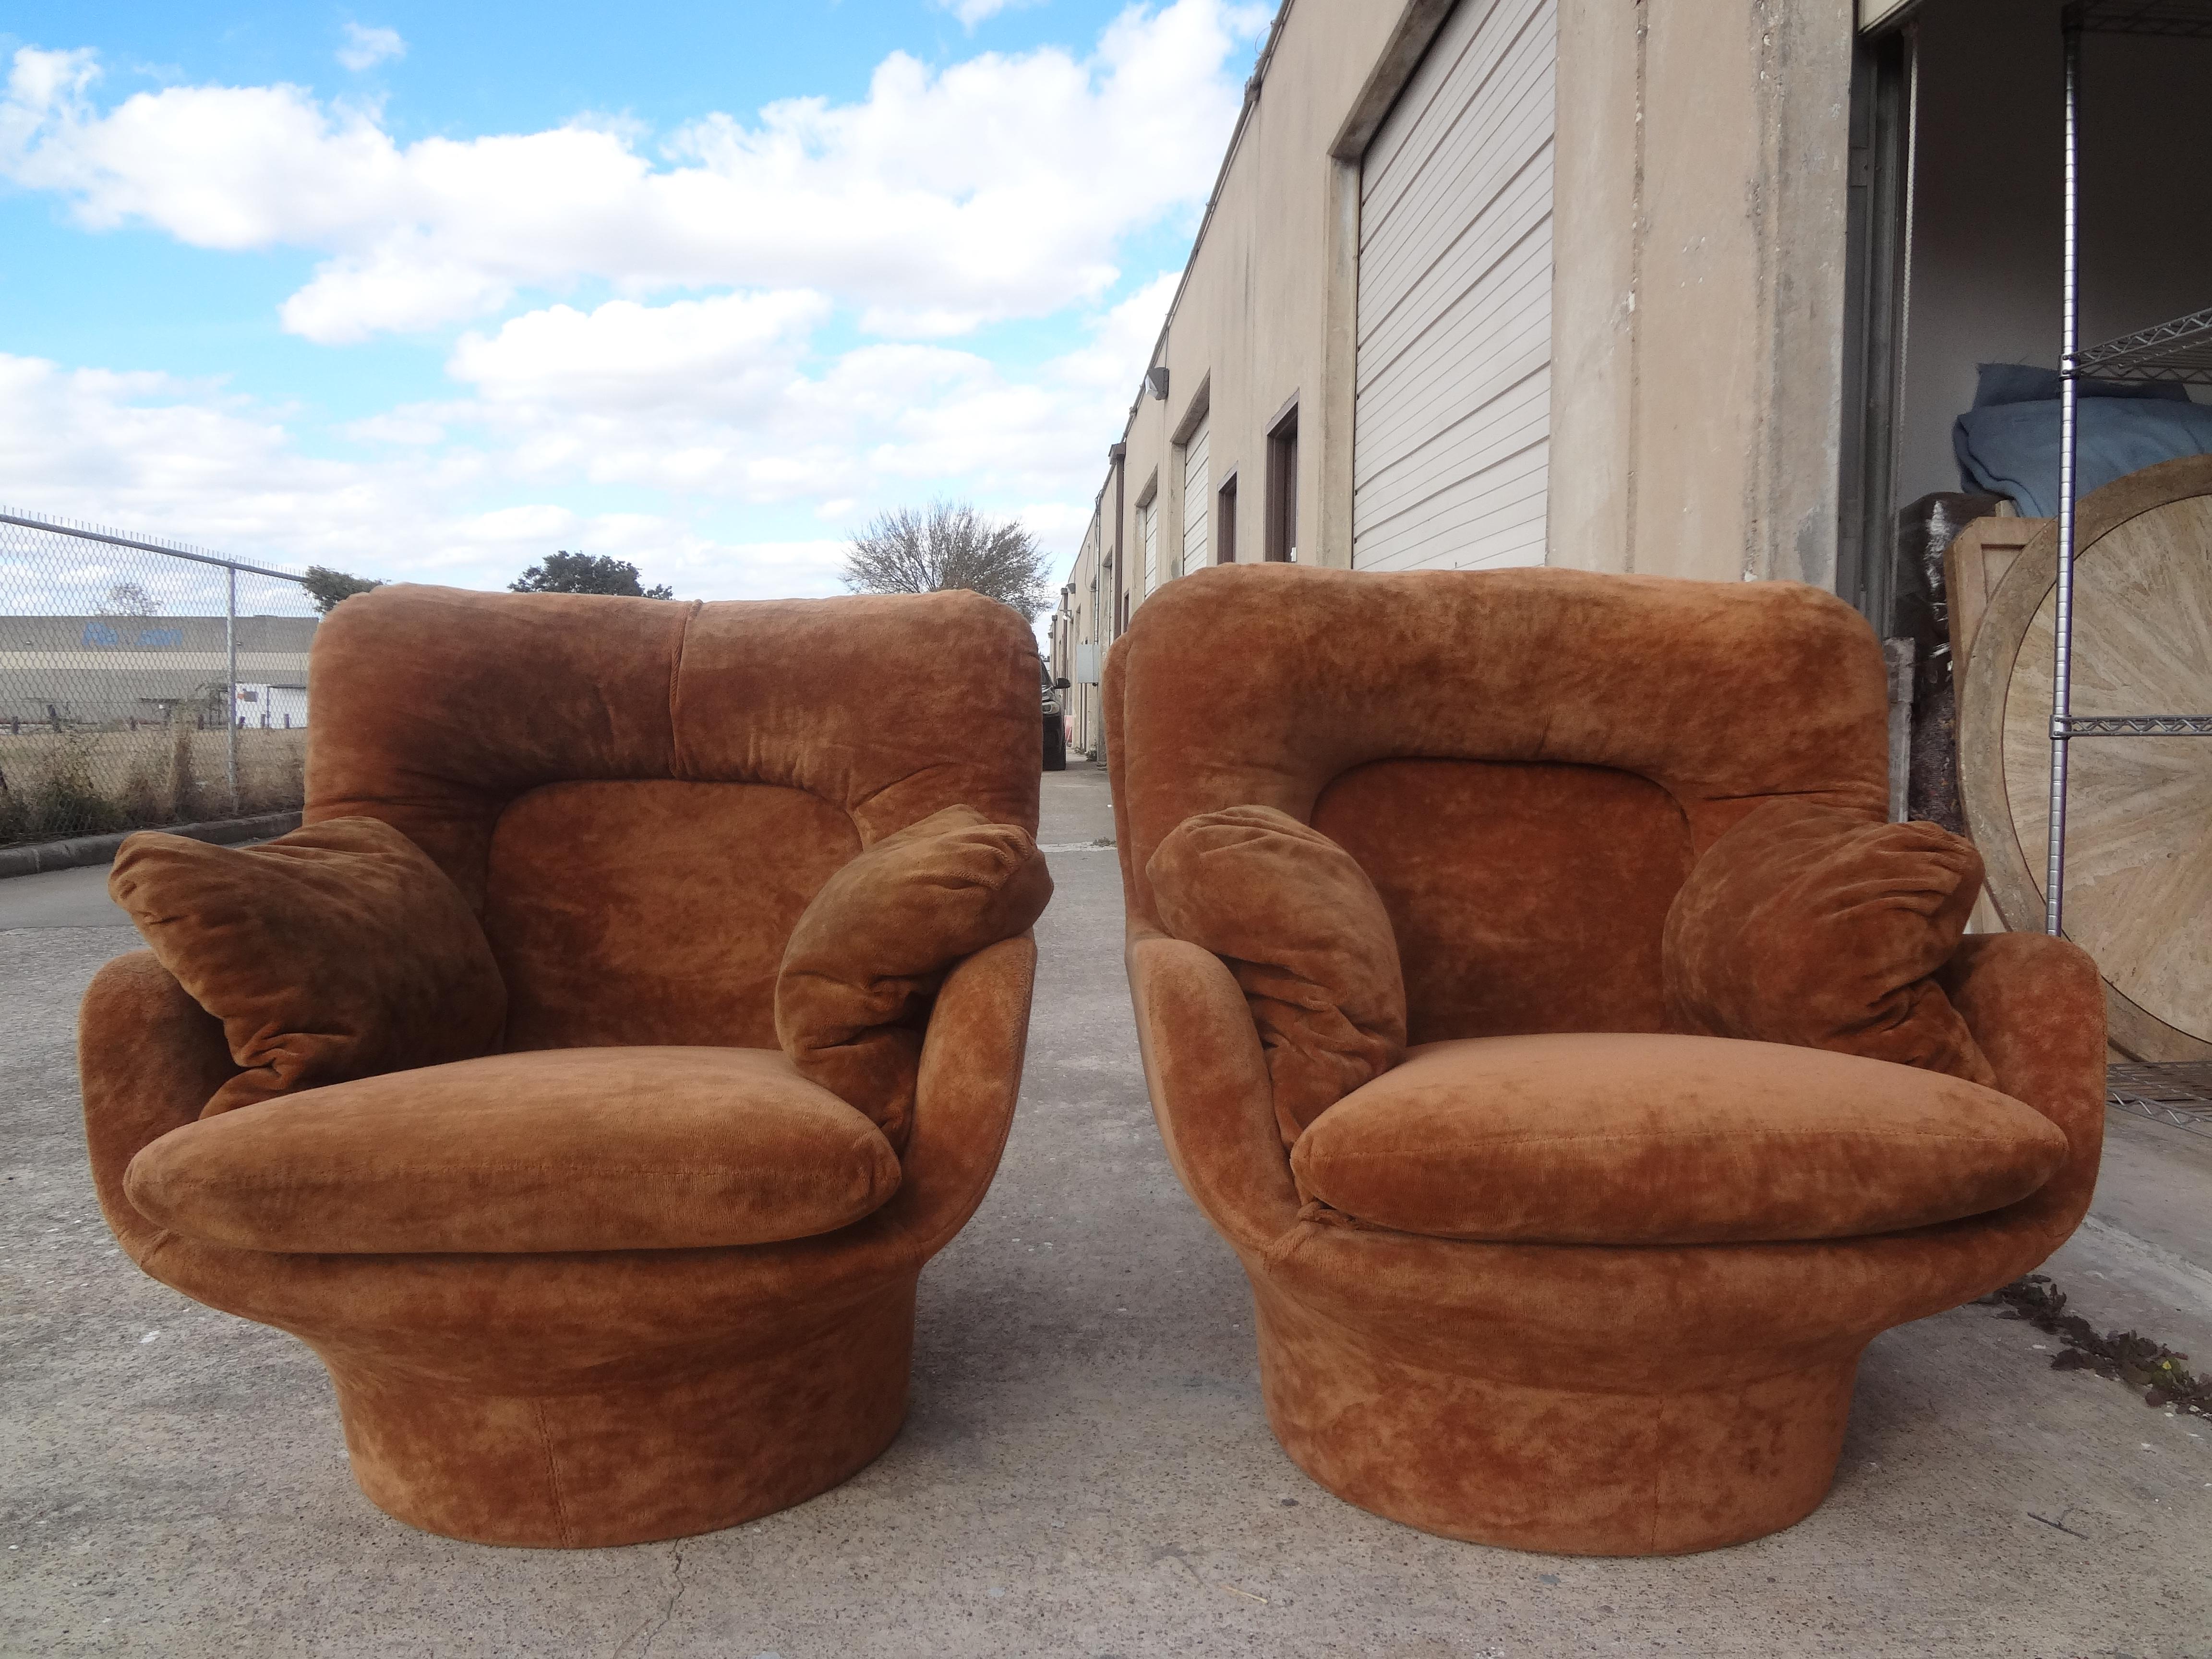 Rare pair of French Michel Cadestin for Airborne Karate lounge chairs. These shapely and extremely comfortable lounge chairs are in very good condition and date to 1968.